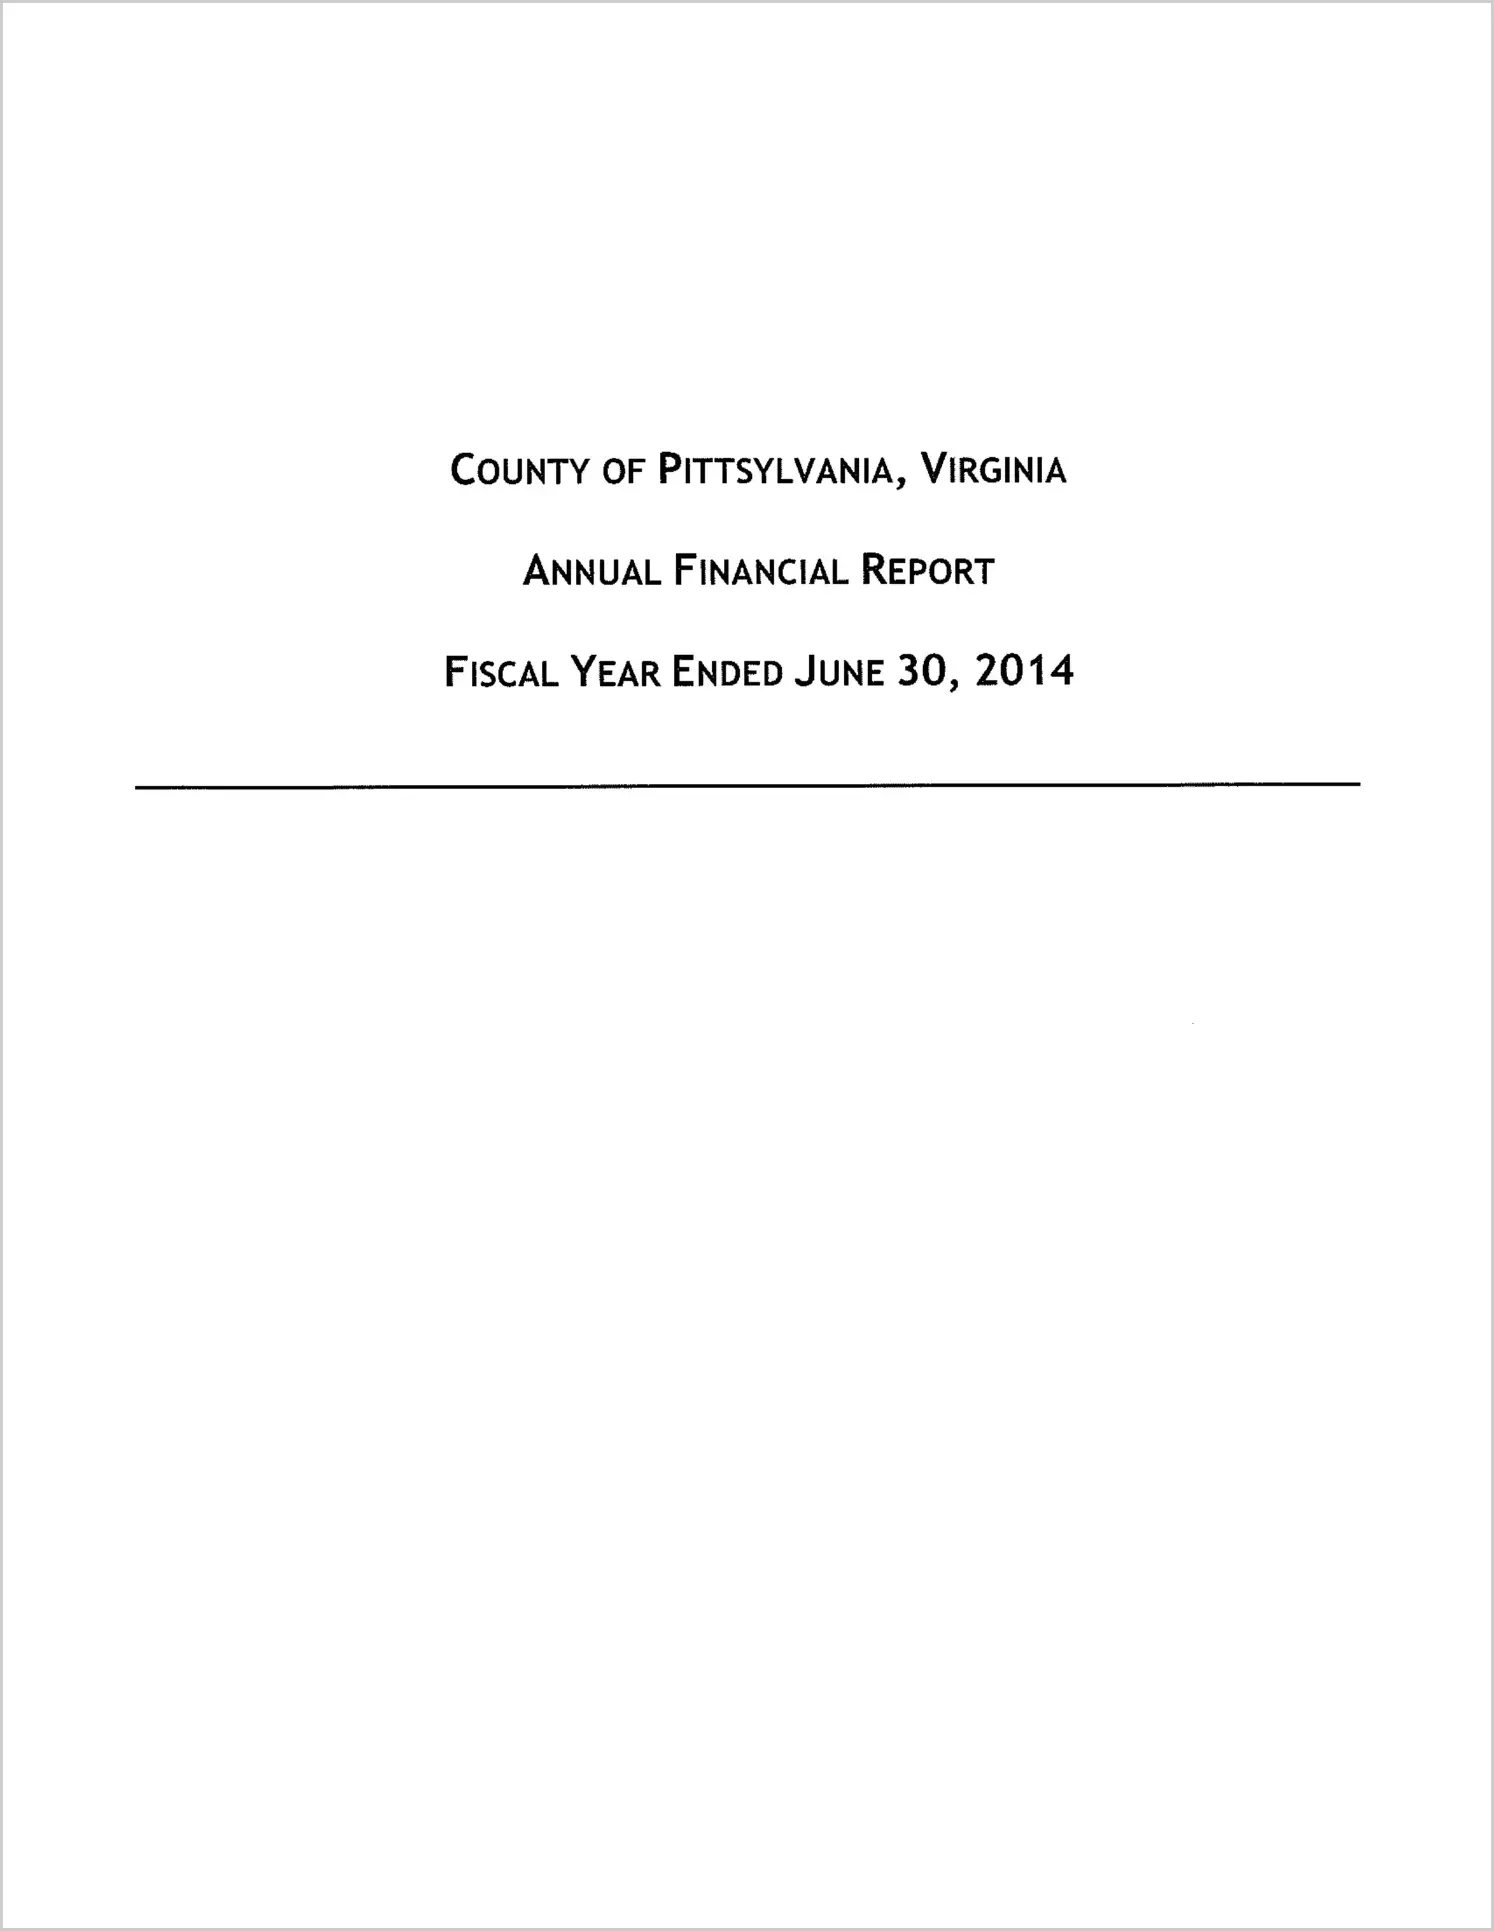 2014 Annual Financial Report for County of Pittsylvania